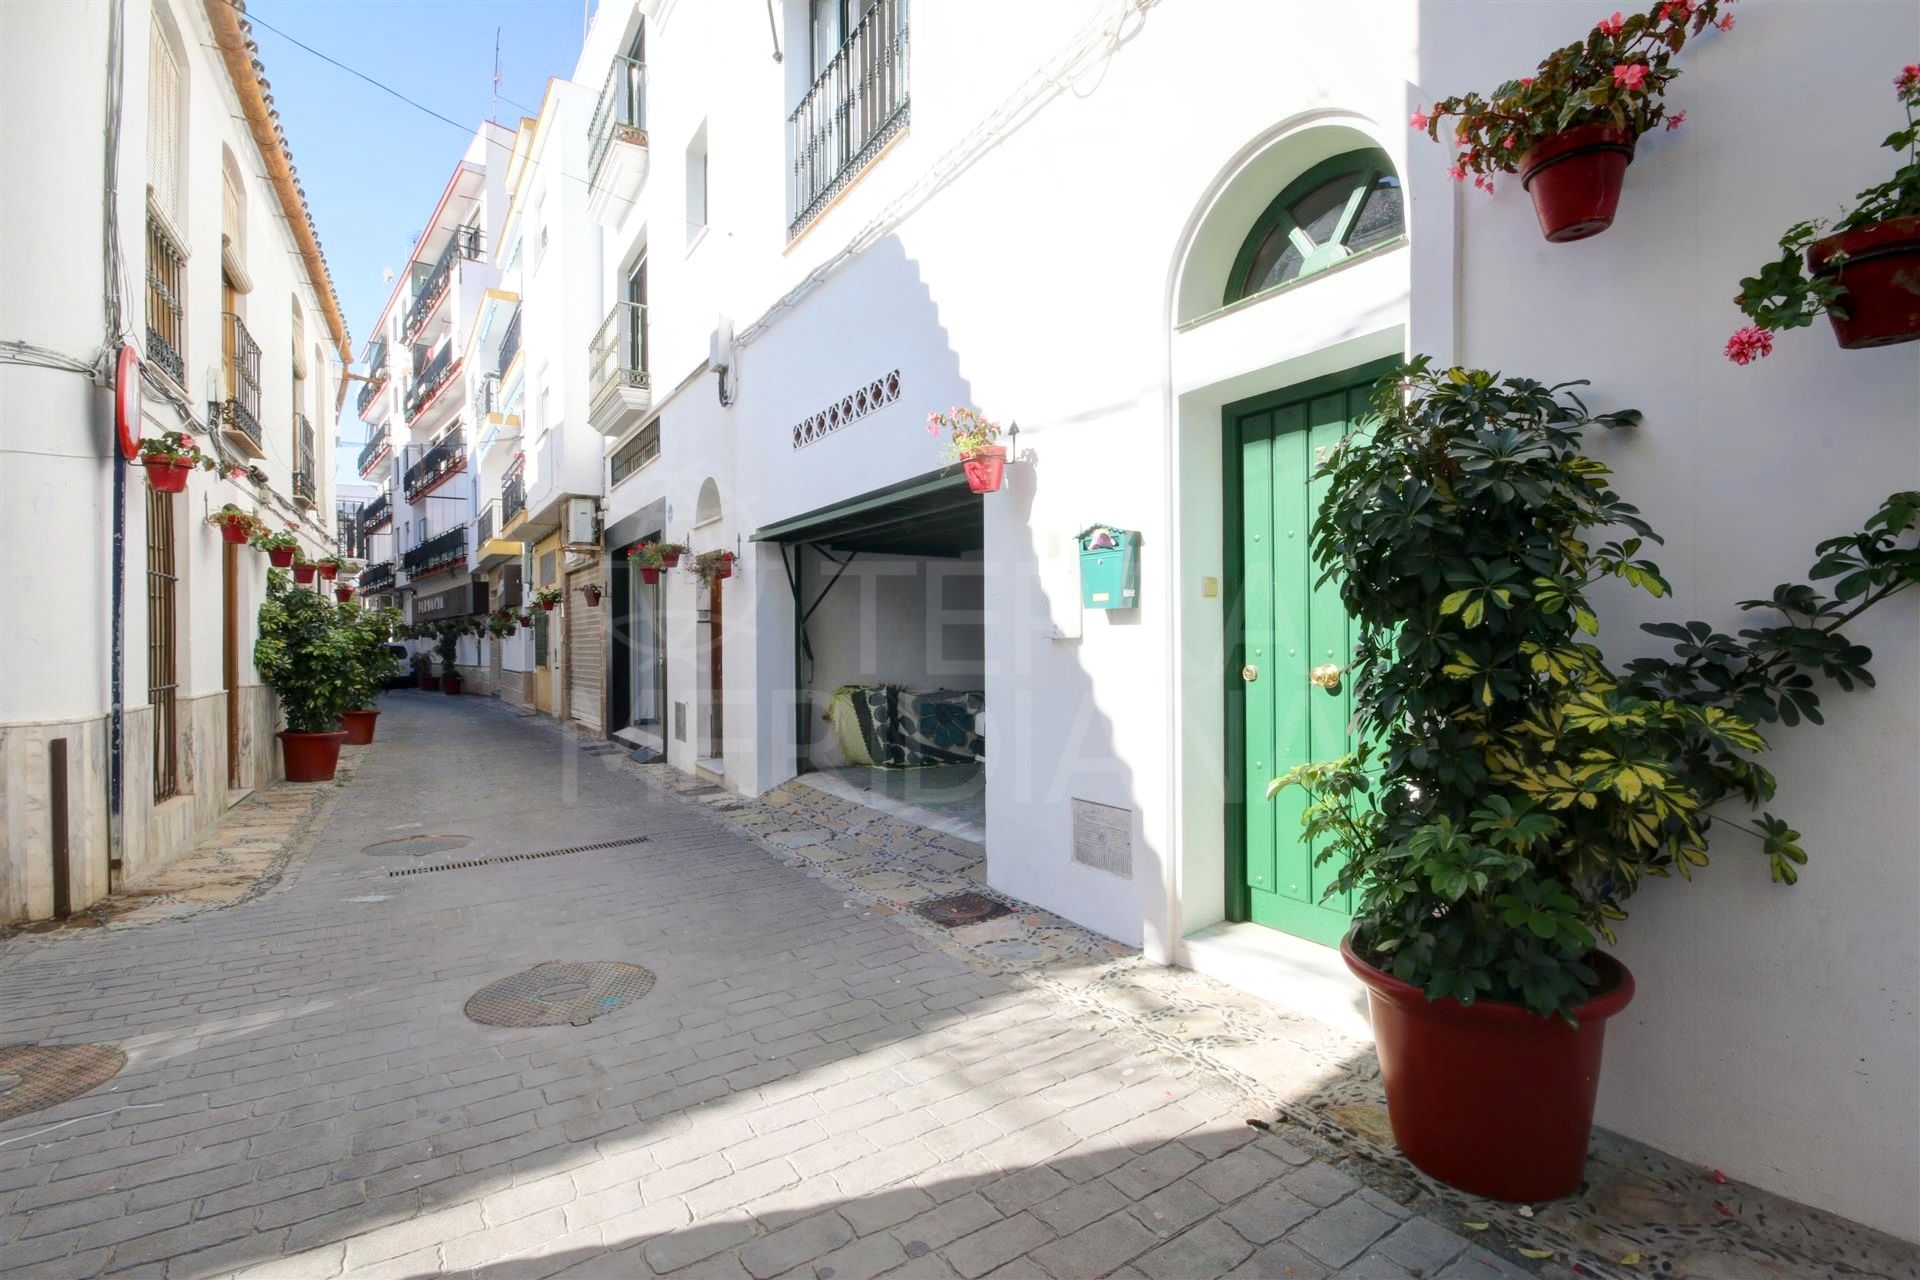 Townhouse for sale with private garage, Estepona old town centre. close to the beach